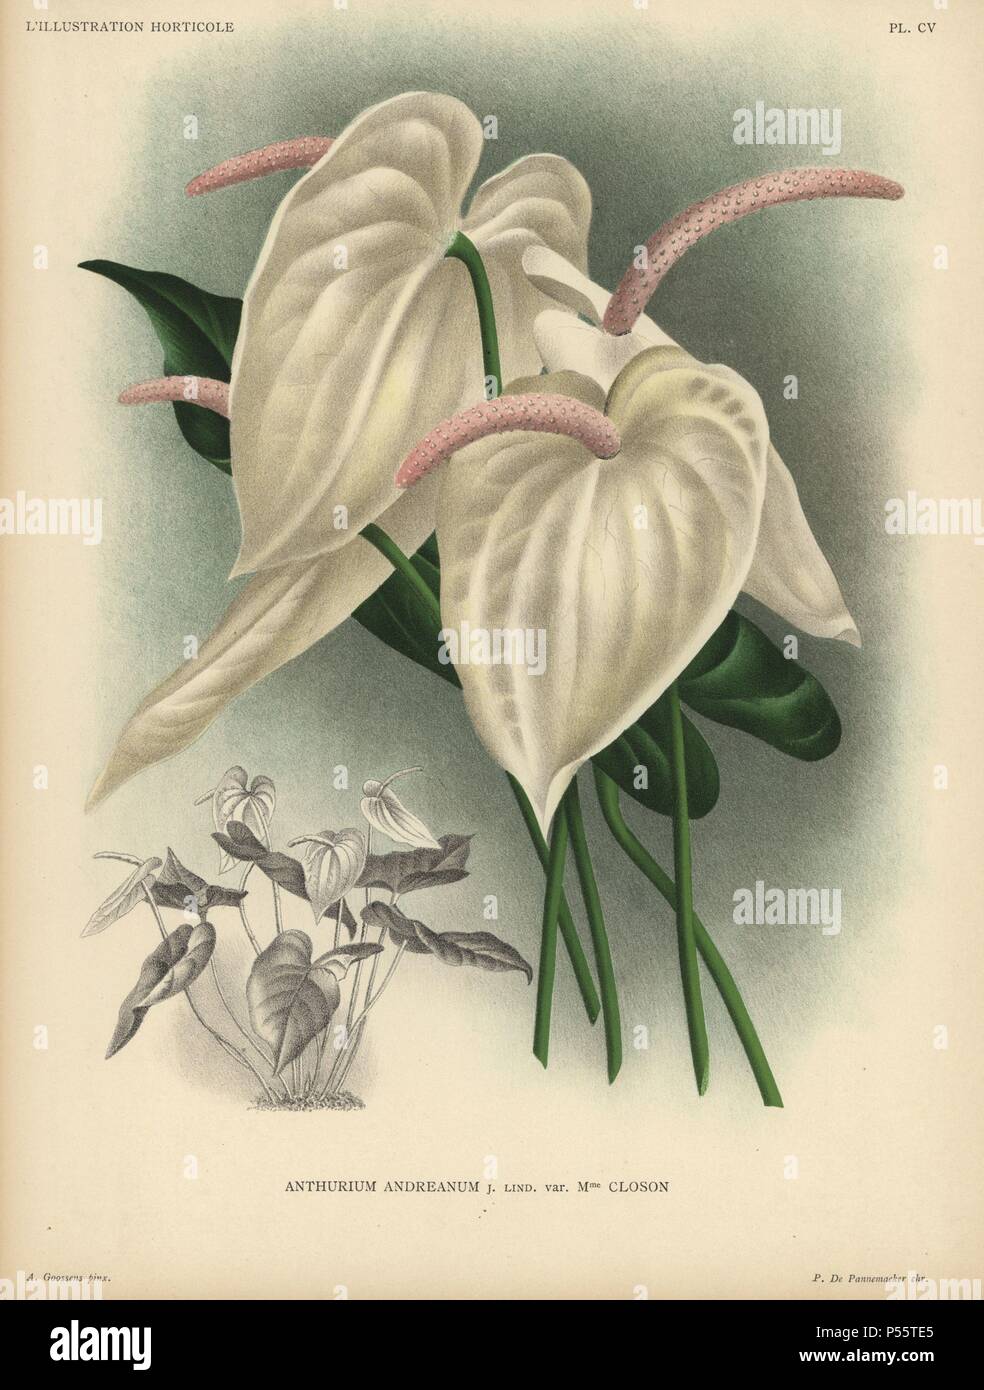 Cream colored flamingo flower or anthurium lily. Anthurium andreanum J. Lind, Madam Closon's variety. Illustration by A. Goossens, chromolithograph by P. de Pannemaeker, for Jean Linden's 'L'Illustration Horticole' published in Ghent in 1886. Jean Linden (1817-1898) was a Belgian explorer, horticulturist, scientist and publisher of botanical books. Stock Photo